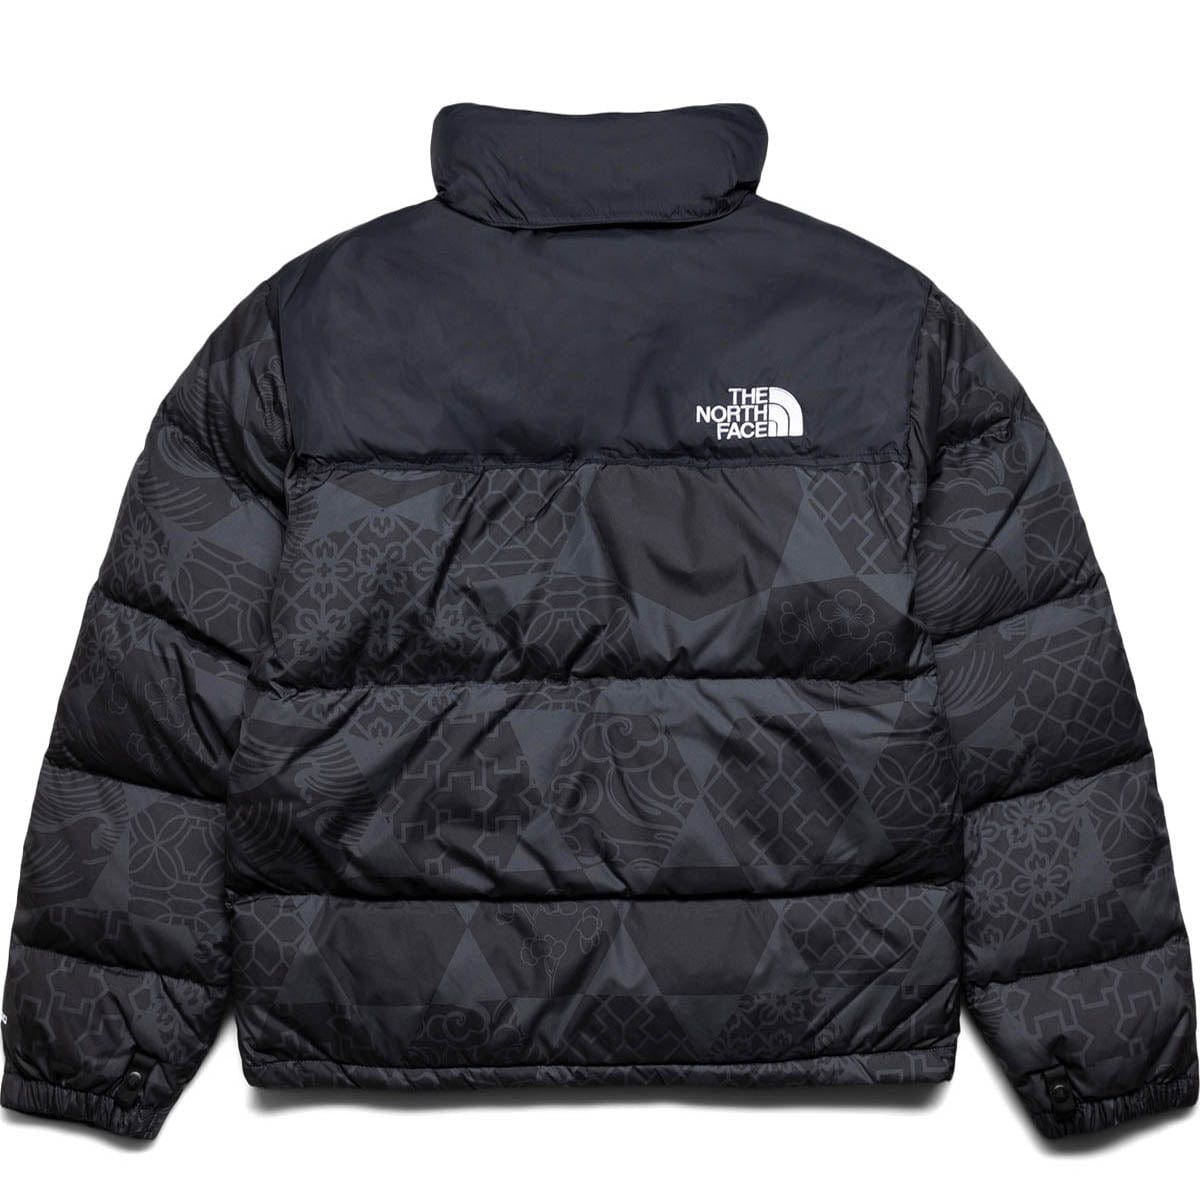 The North Face Outerwear PRINTED 1996 RETRO NUPTSE JACKET